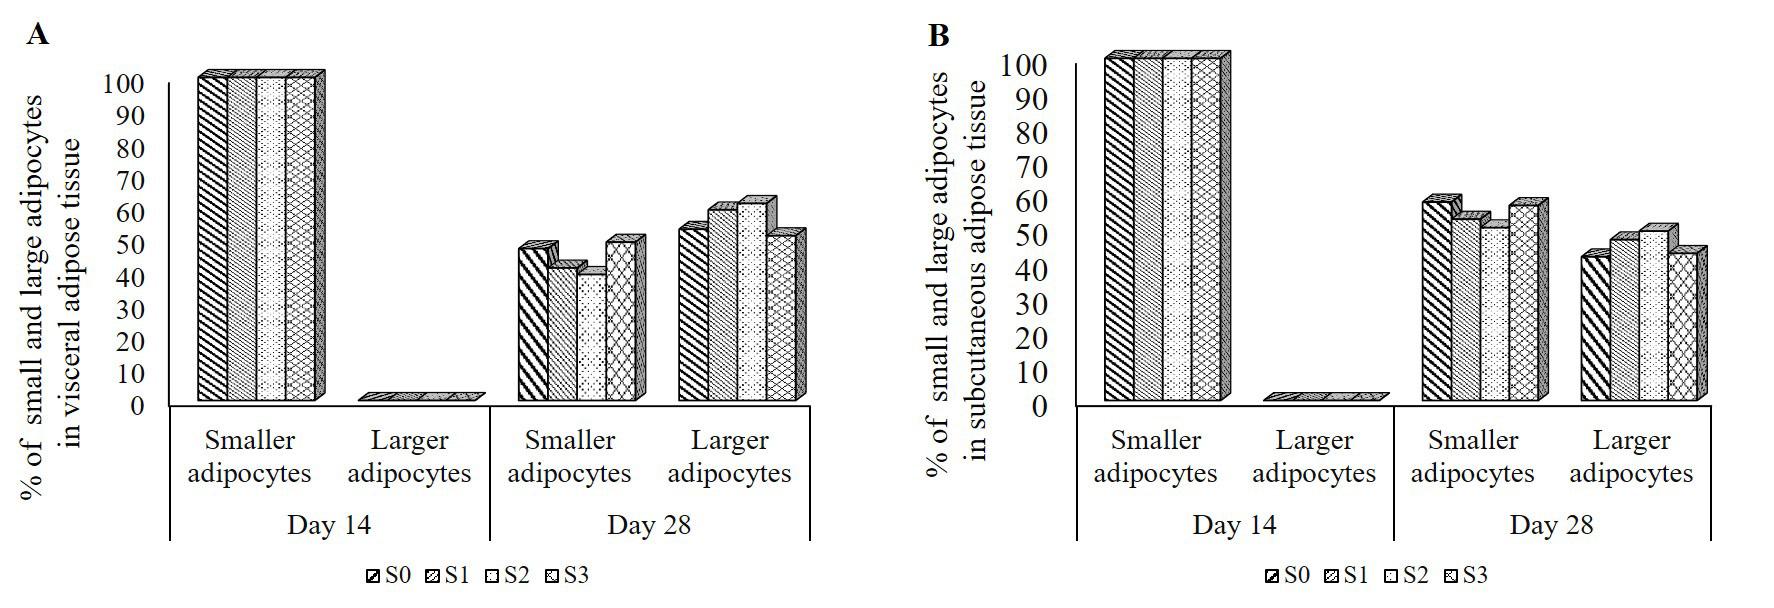 Effects of Clove and Tulsi supplementation on the dynamics and cellularity of adipose tissue in the visceral and subcutaneous fat depots in Broiler